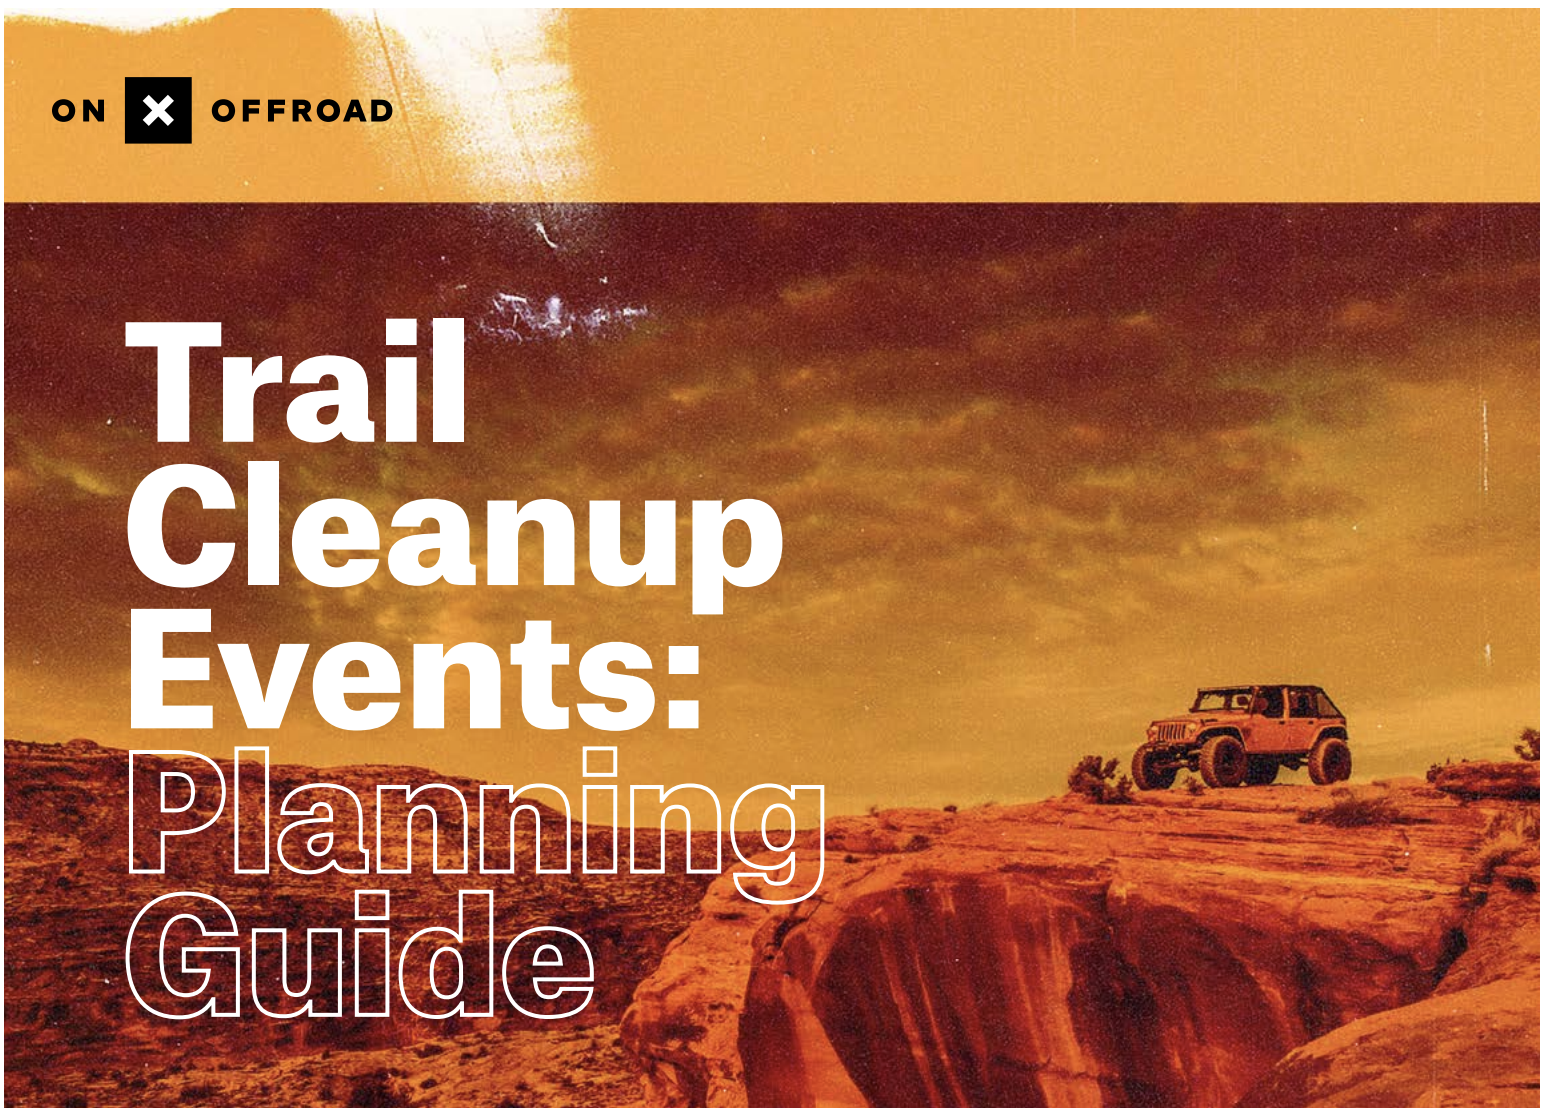 onX Offroad is kicking off trail season with their Trail Cleanup Guide.